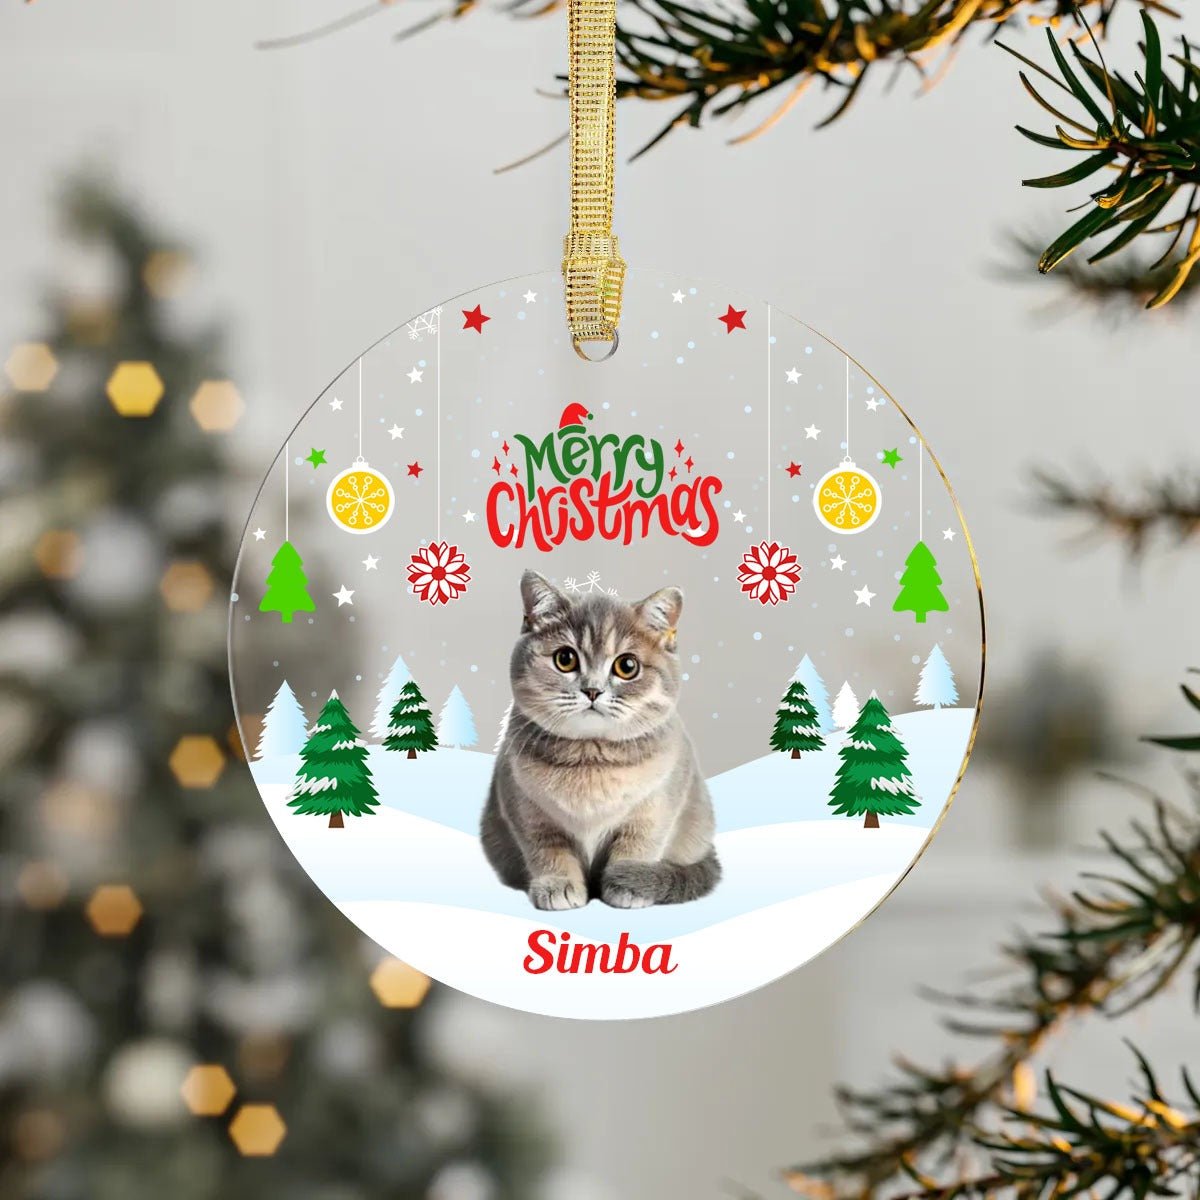 Personalised Pet Photo Acrylic Glass Ornament - Shaggy Chic